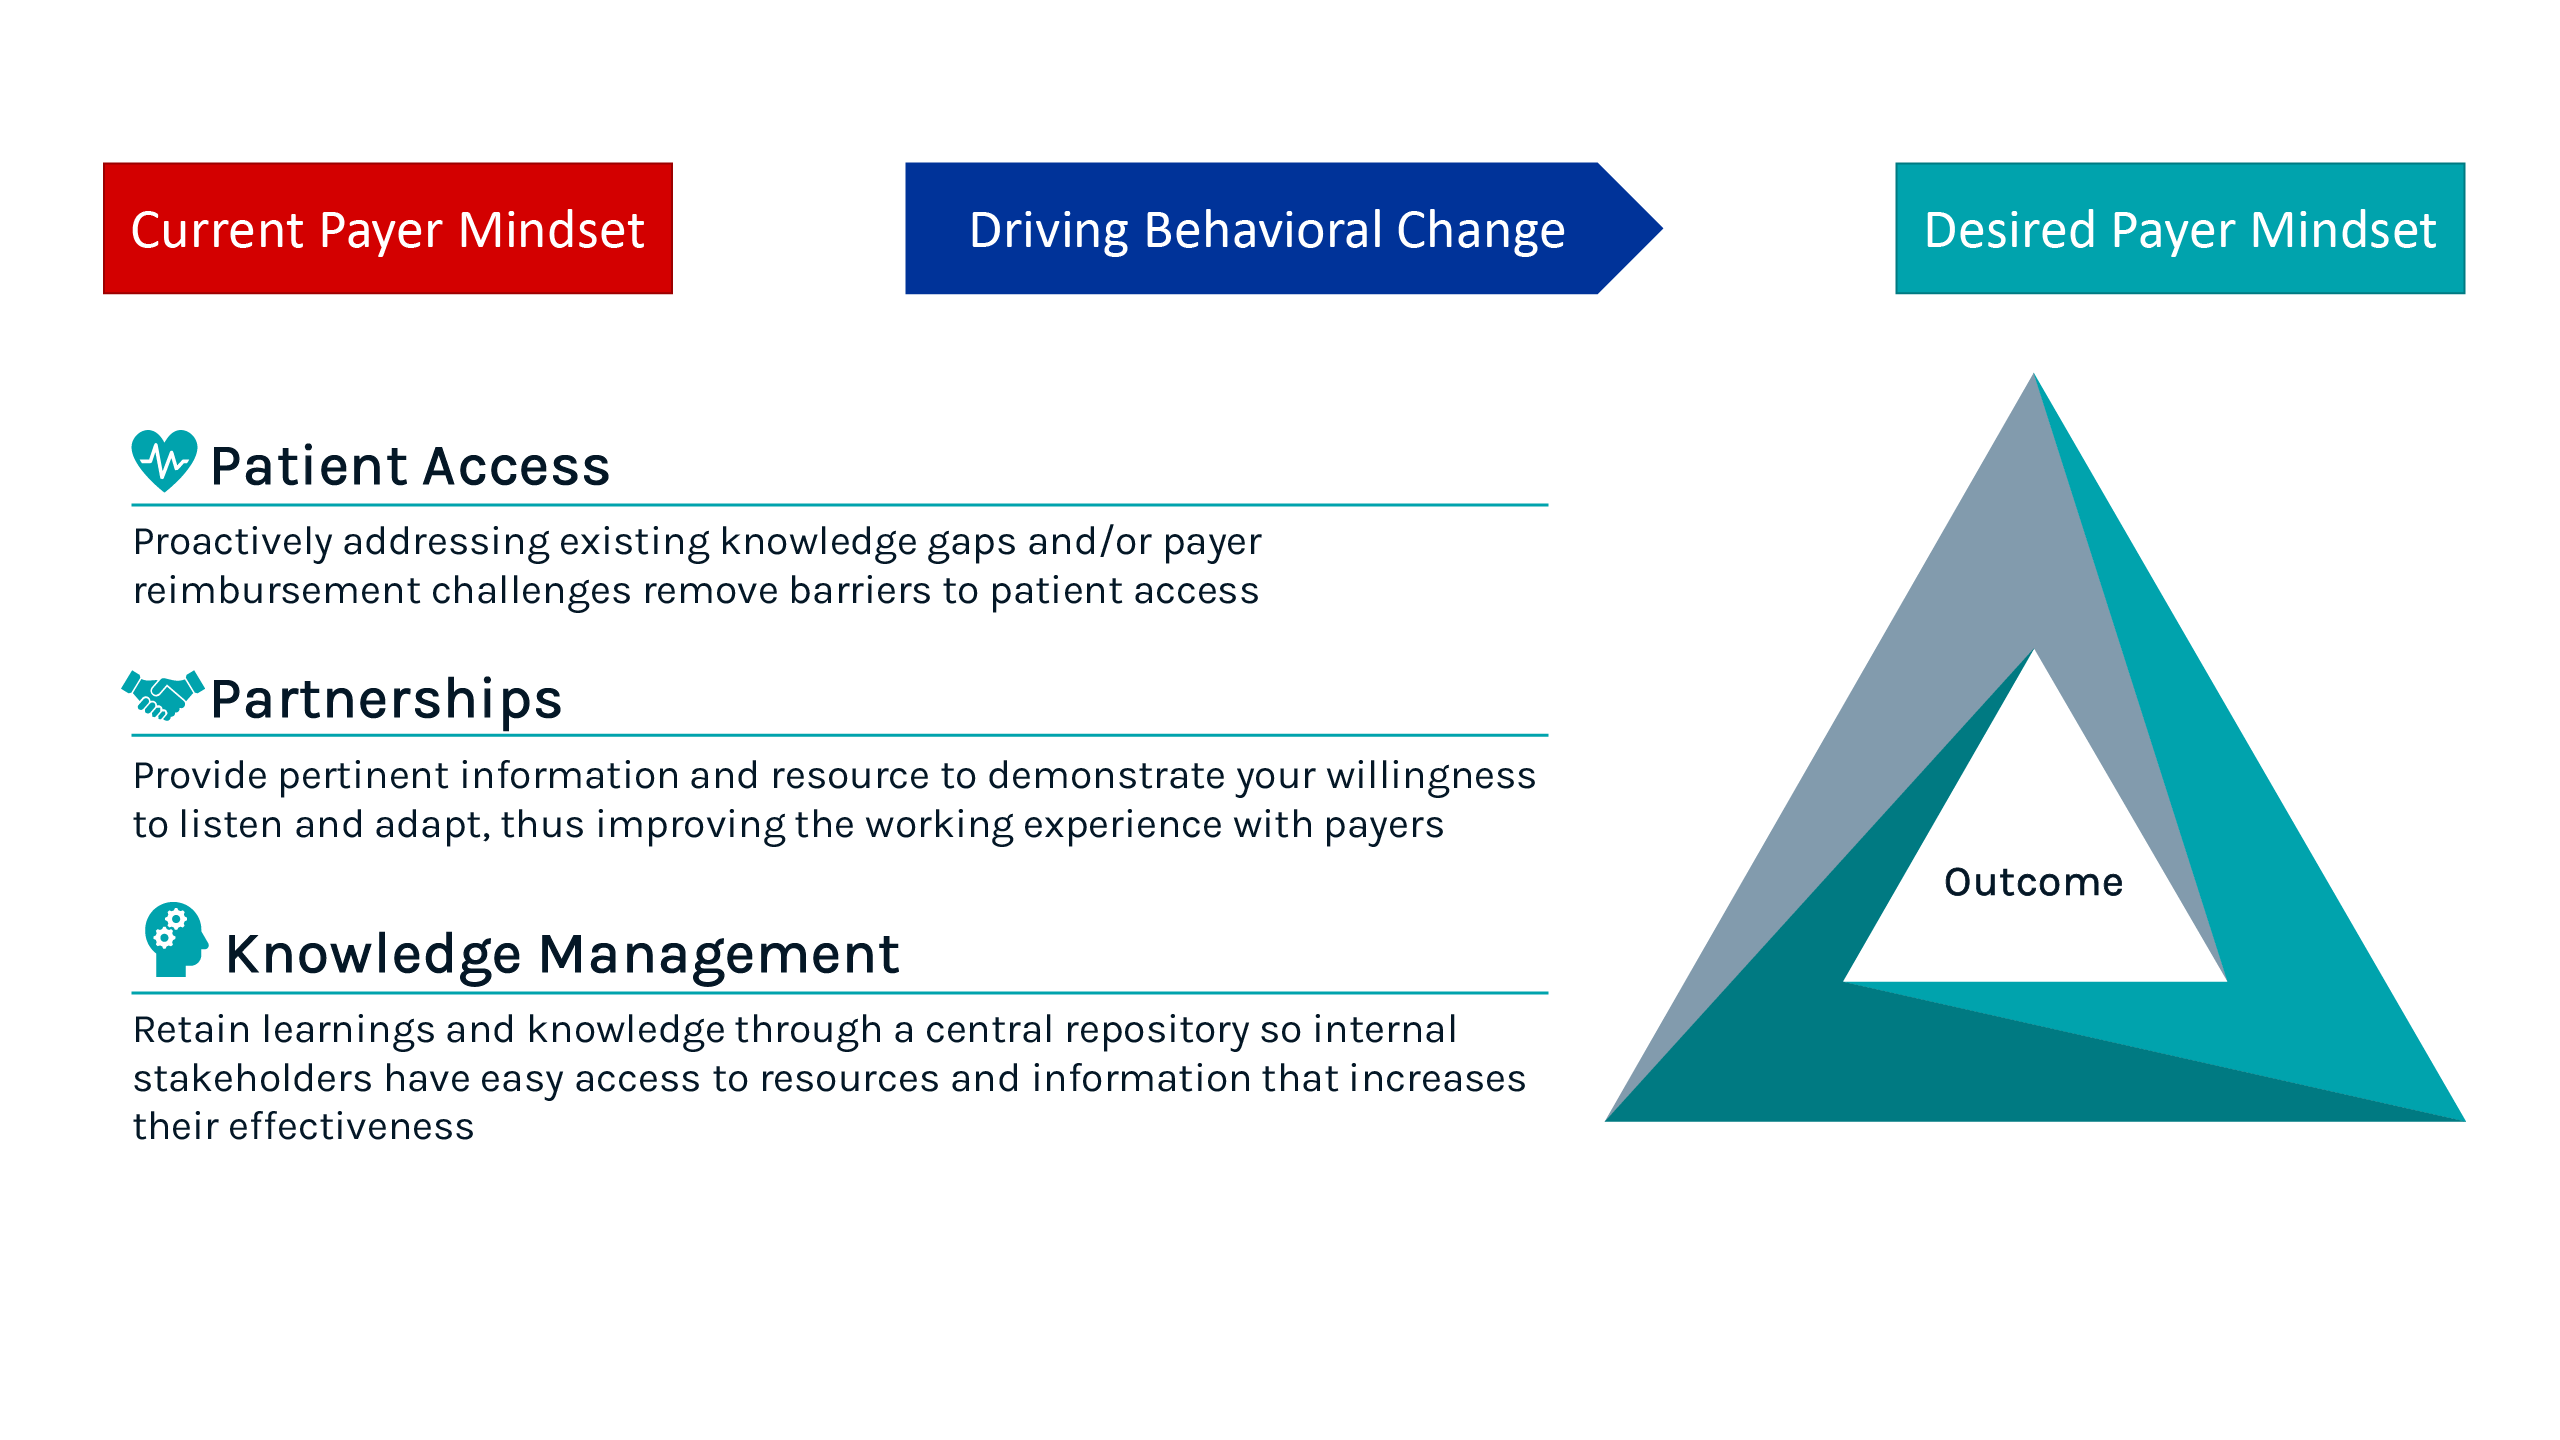 Graphic showing a turquoise triangle with 3 components that representing Desired Payer Mindset: Patient Access, Partnerships, Knowledge Management. 